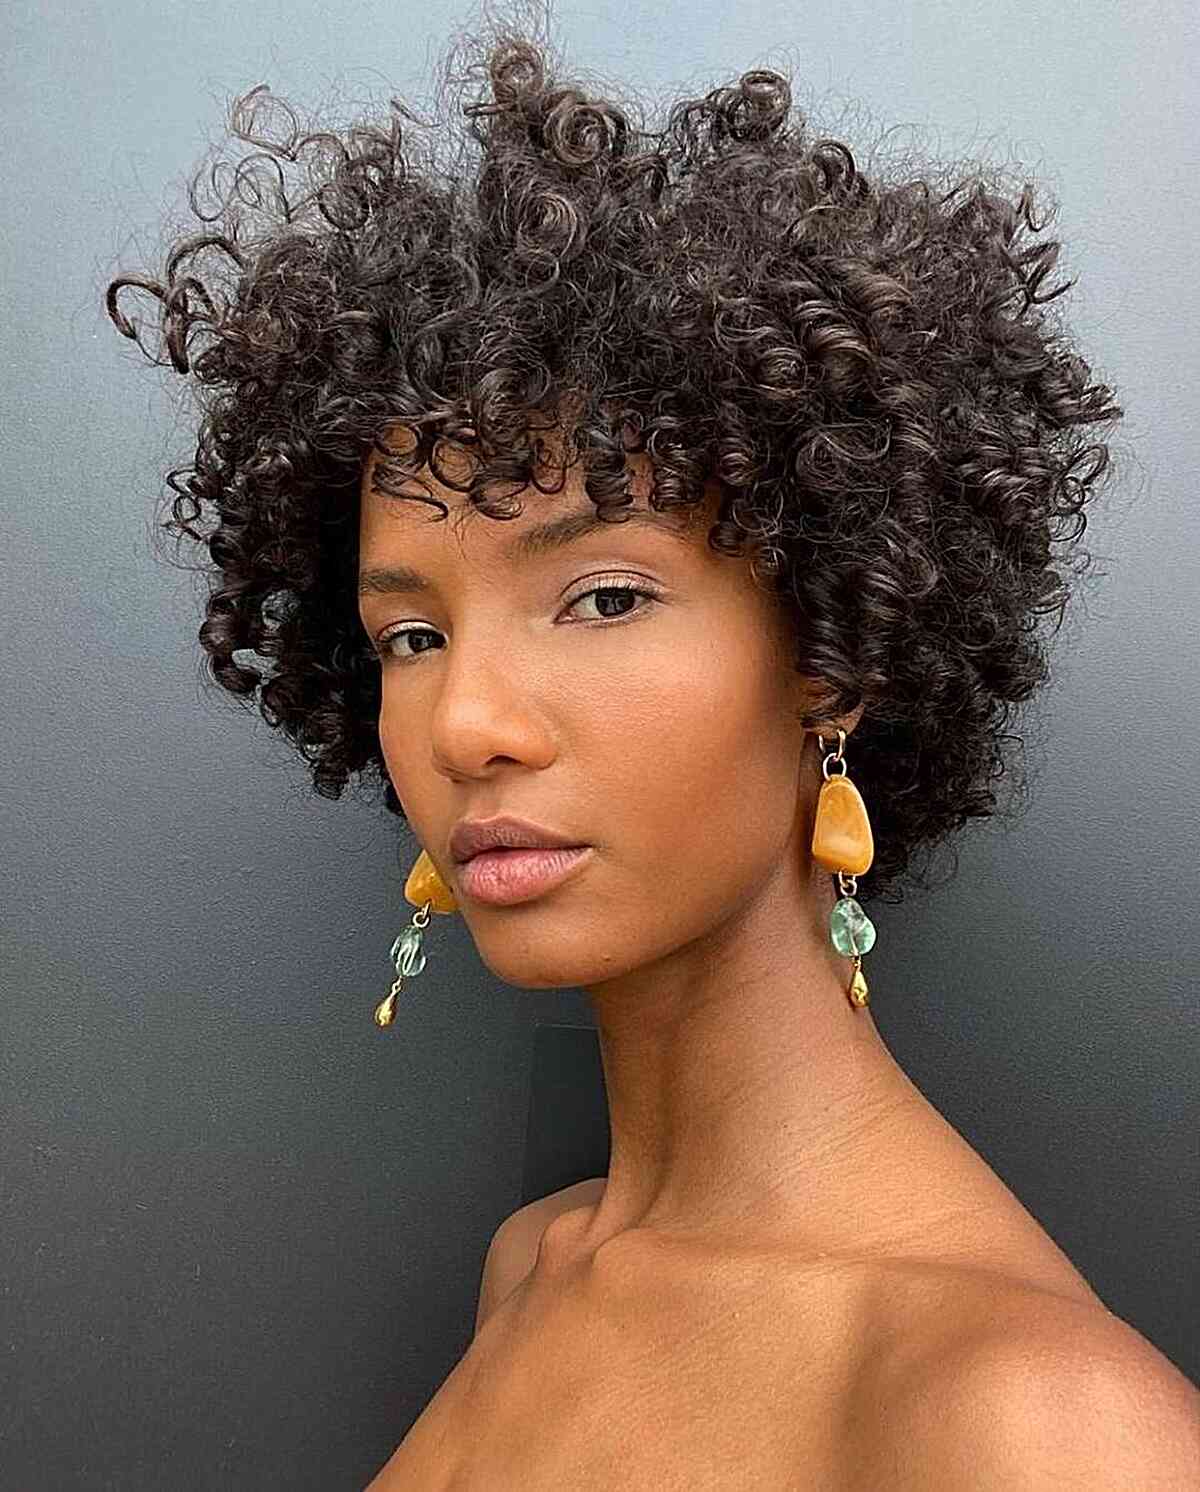  A woman with a Cadō cut on very short kinky hair, with layered curls adding structure and highlighting natural texture.